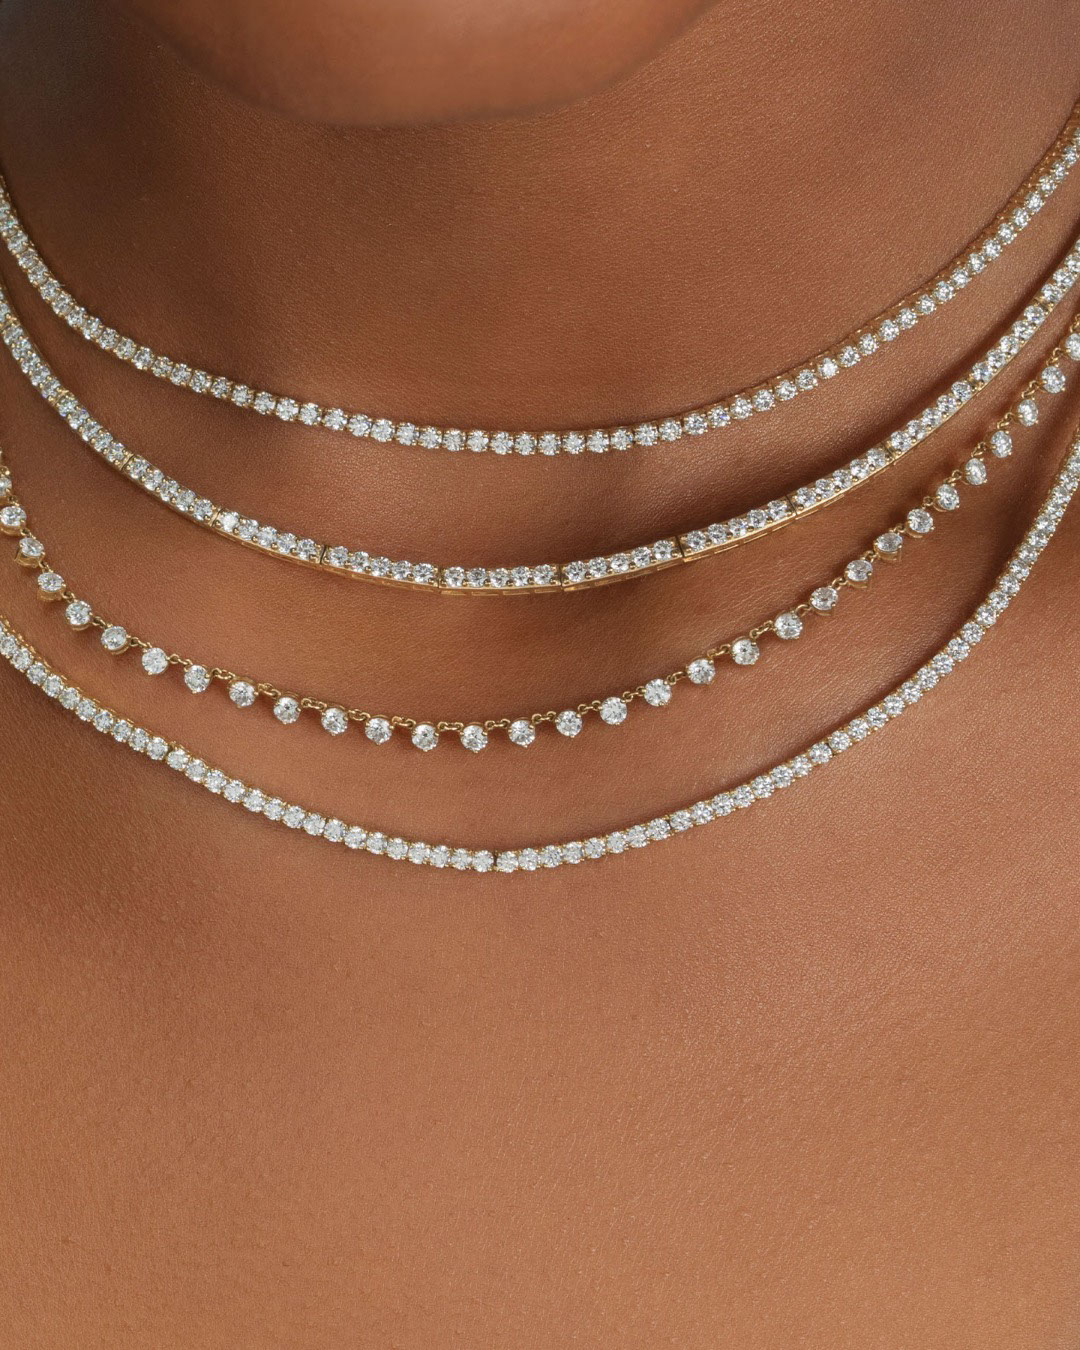 7 Must-Buy Diamond Tennis Necklaces - Only Natural Diamonds